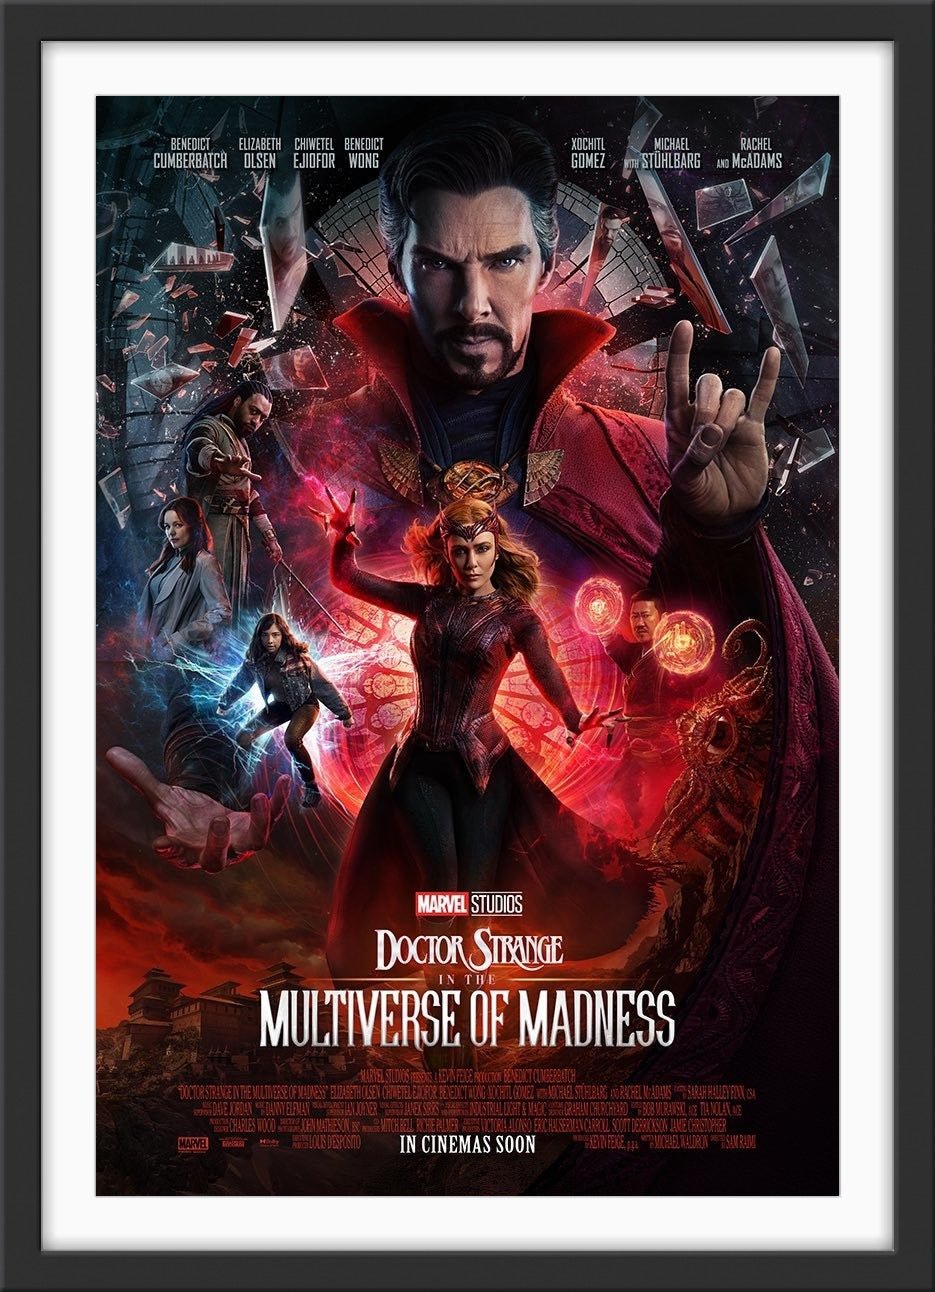 An original movie poster for the Marvel film Doctor Strange in the Multiverse of Madness